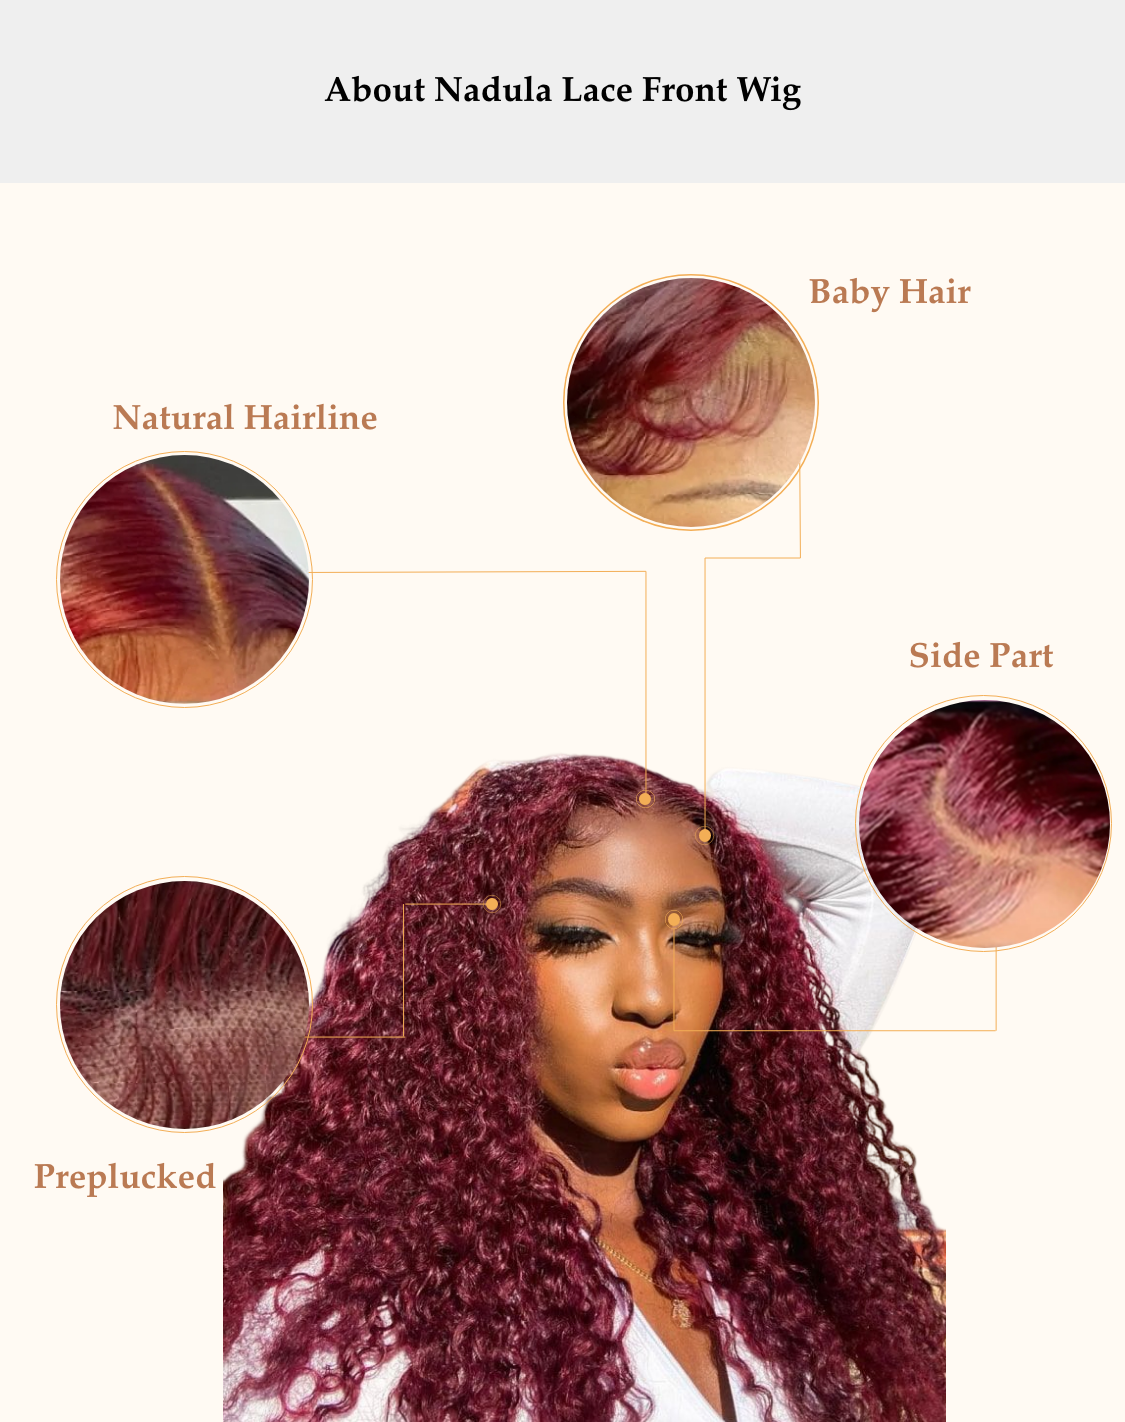 Jsaierl 40cm High Temperature Resistant Silk Wig Burgundy Long Hair Centered Curly Hair with Rose Net, Size: One size, Black